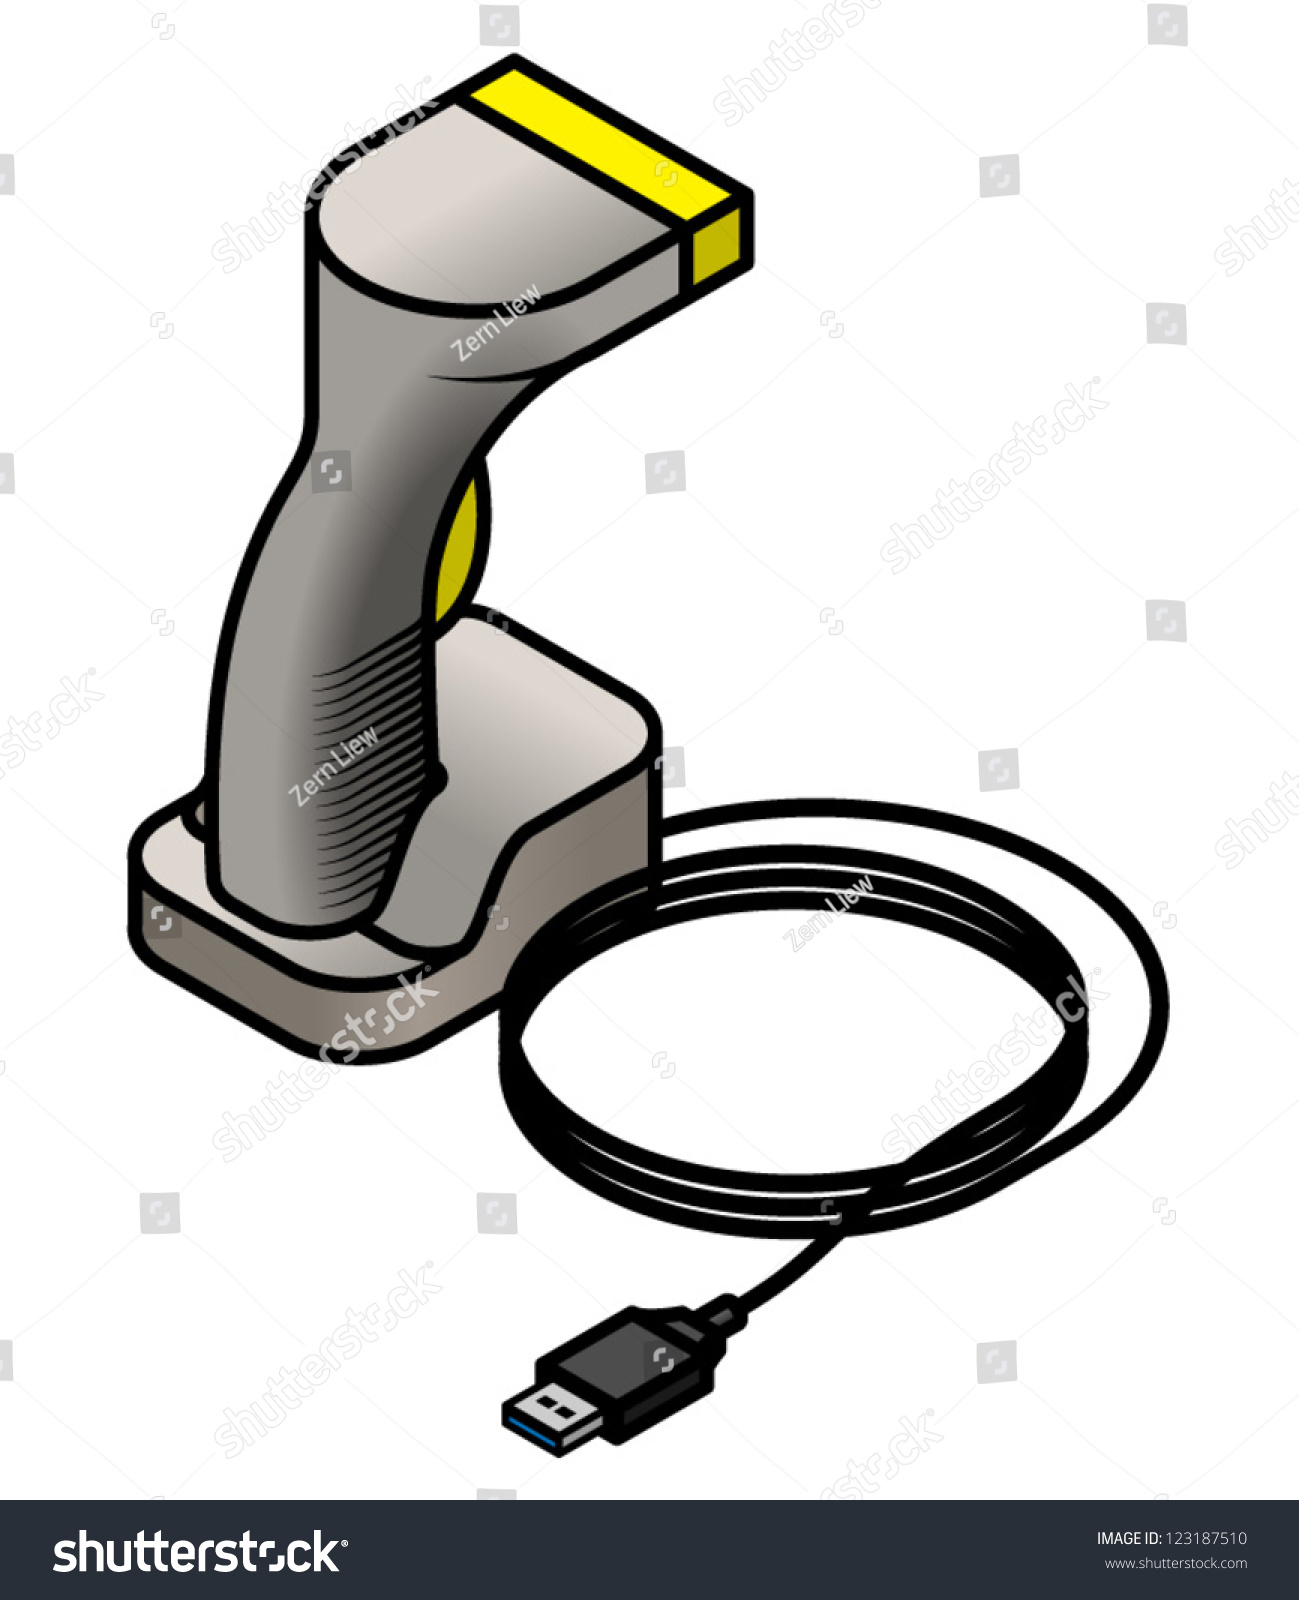 clipart barcode scanner - photo #21